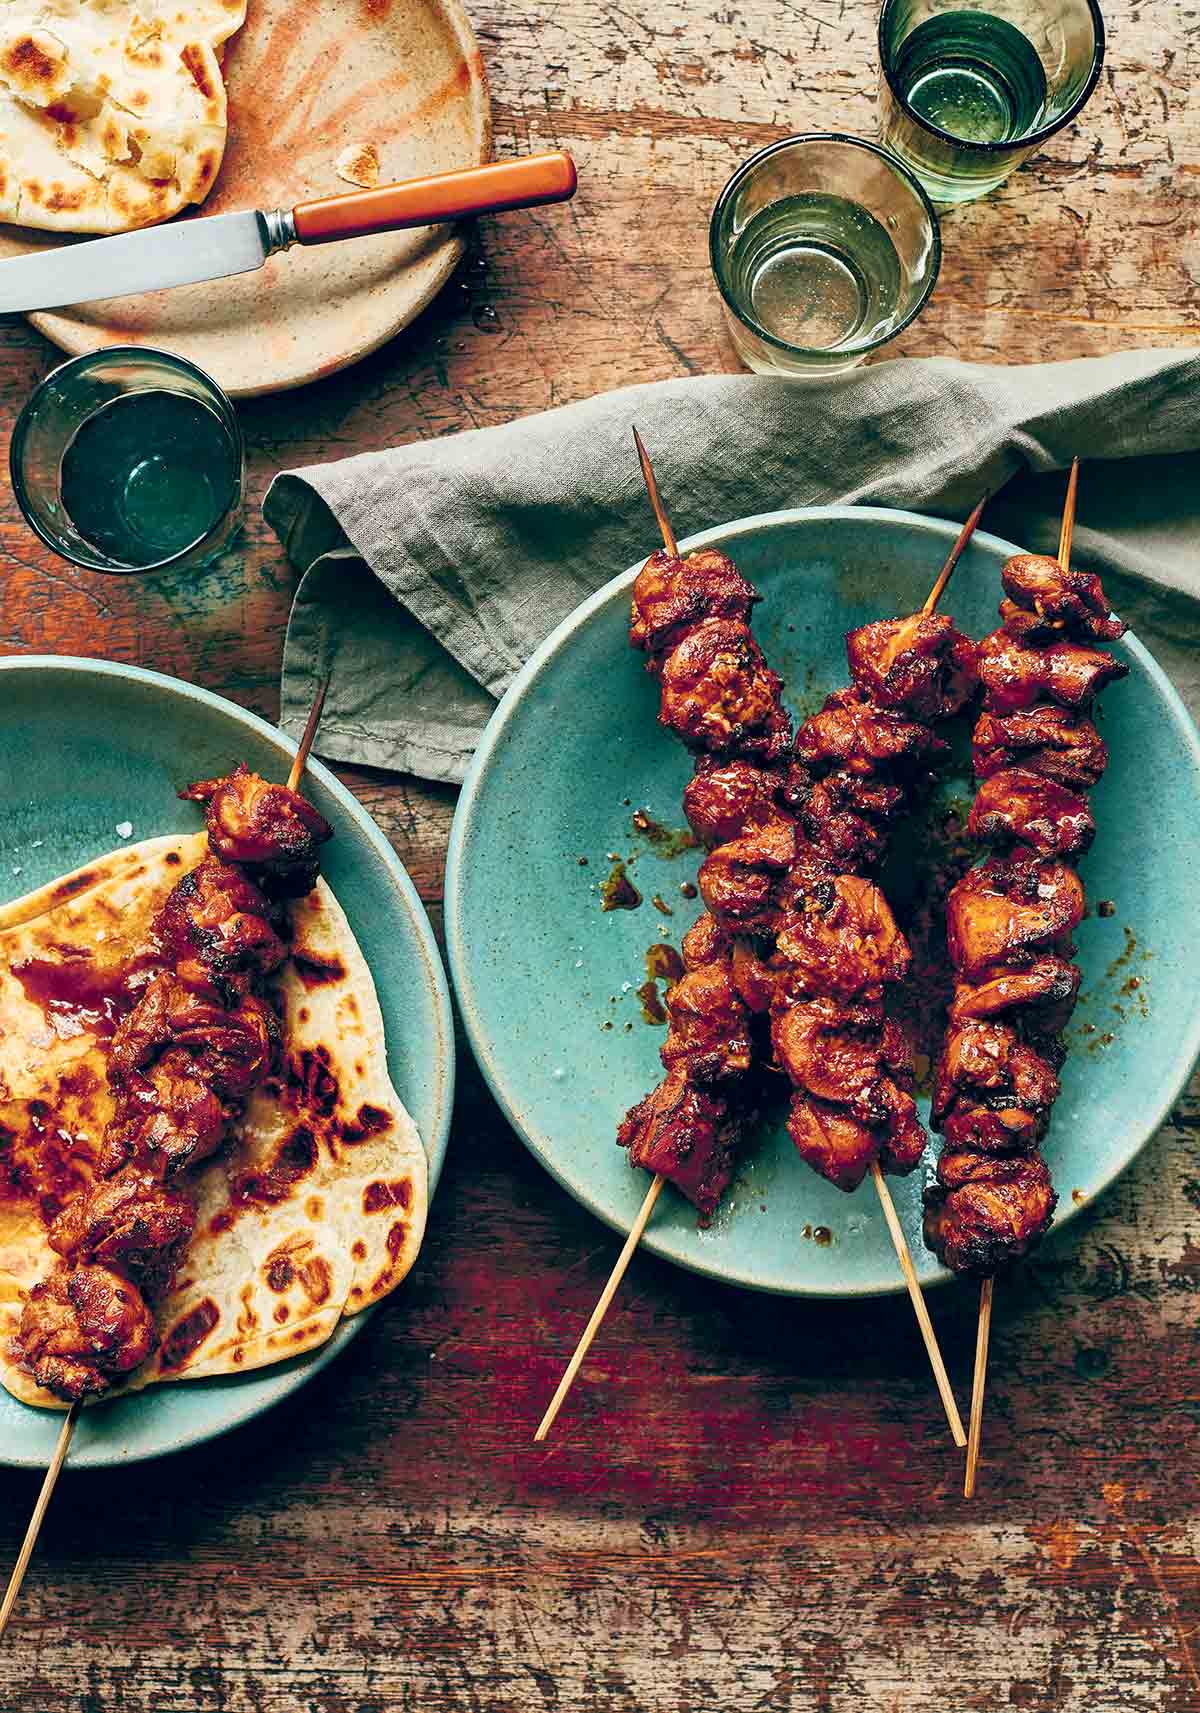 Three simply marinated chicken skewers on a blue plate and a fourth on a piece of pita bread.